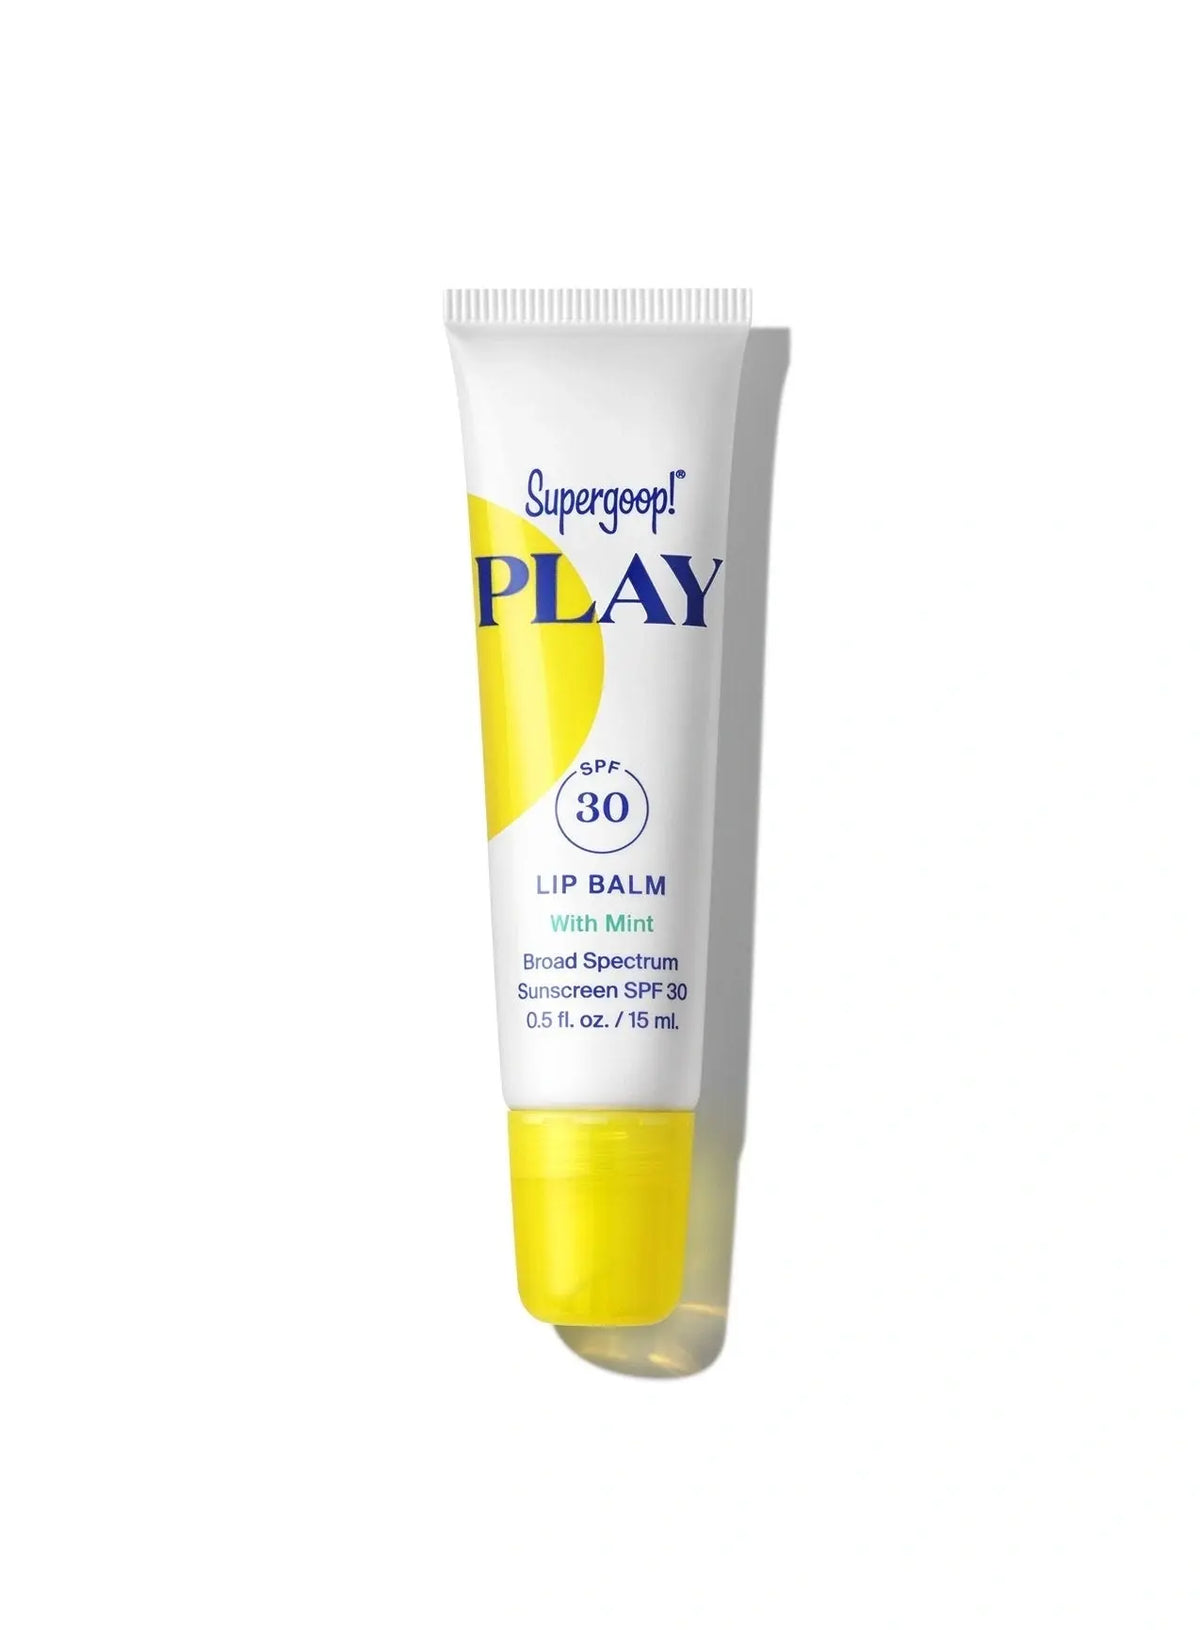 Supergoop! Play Lip Balm with Mint SPF 30